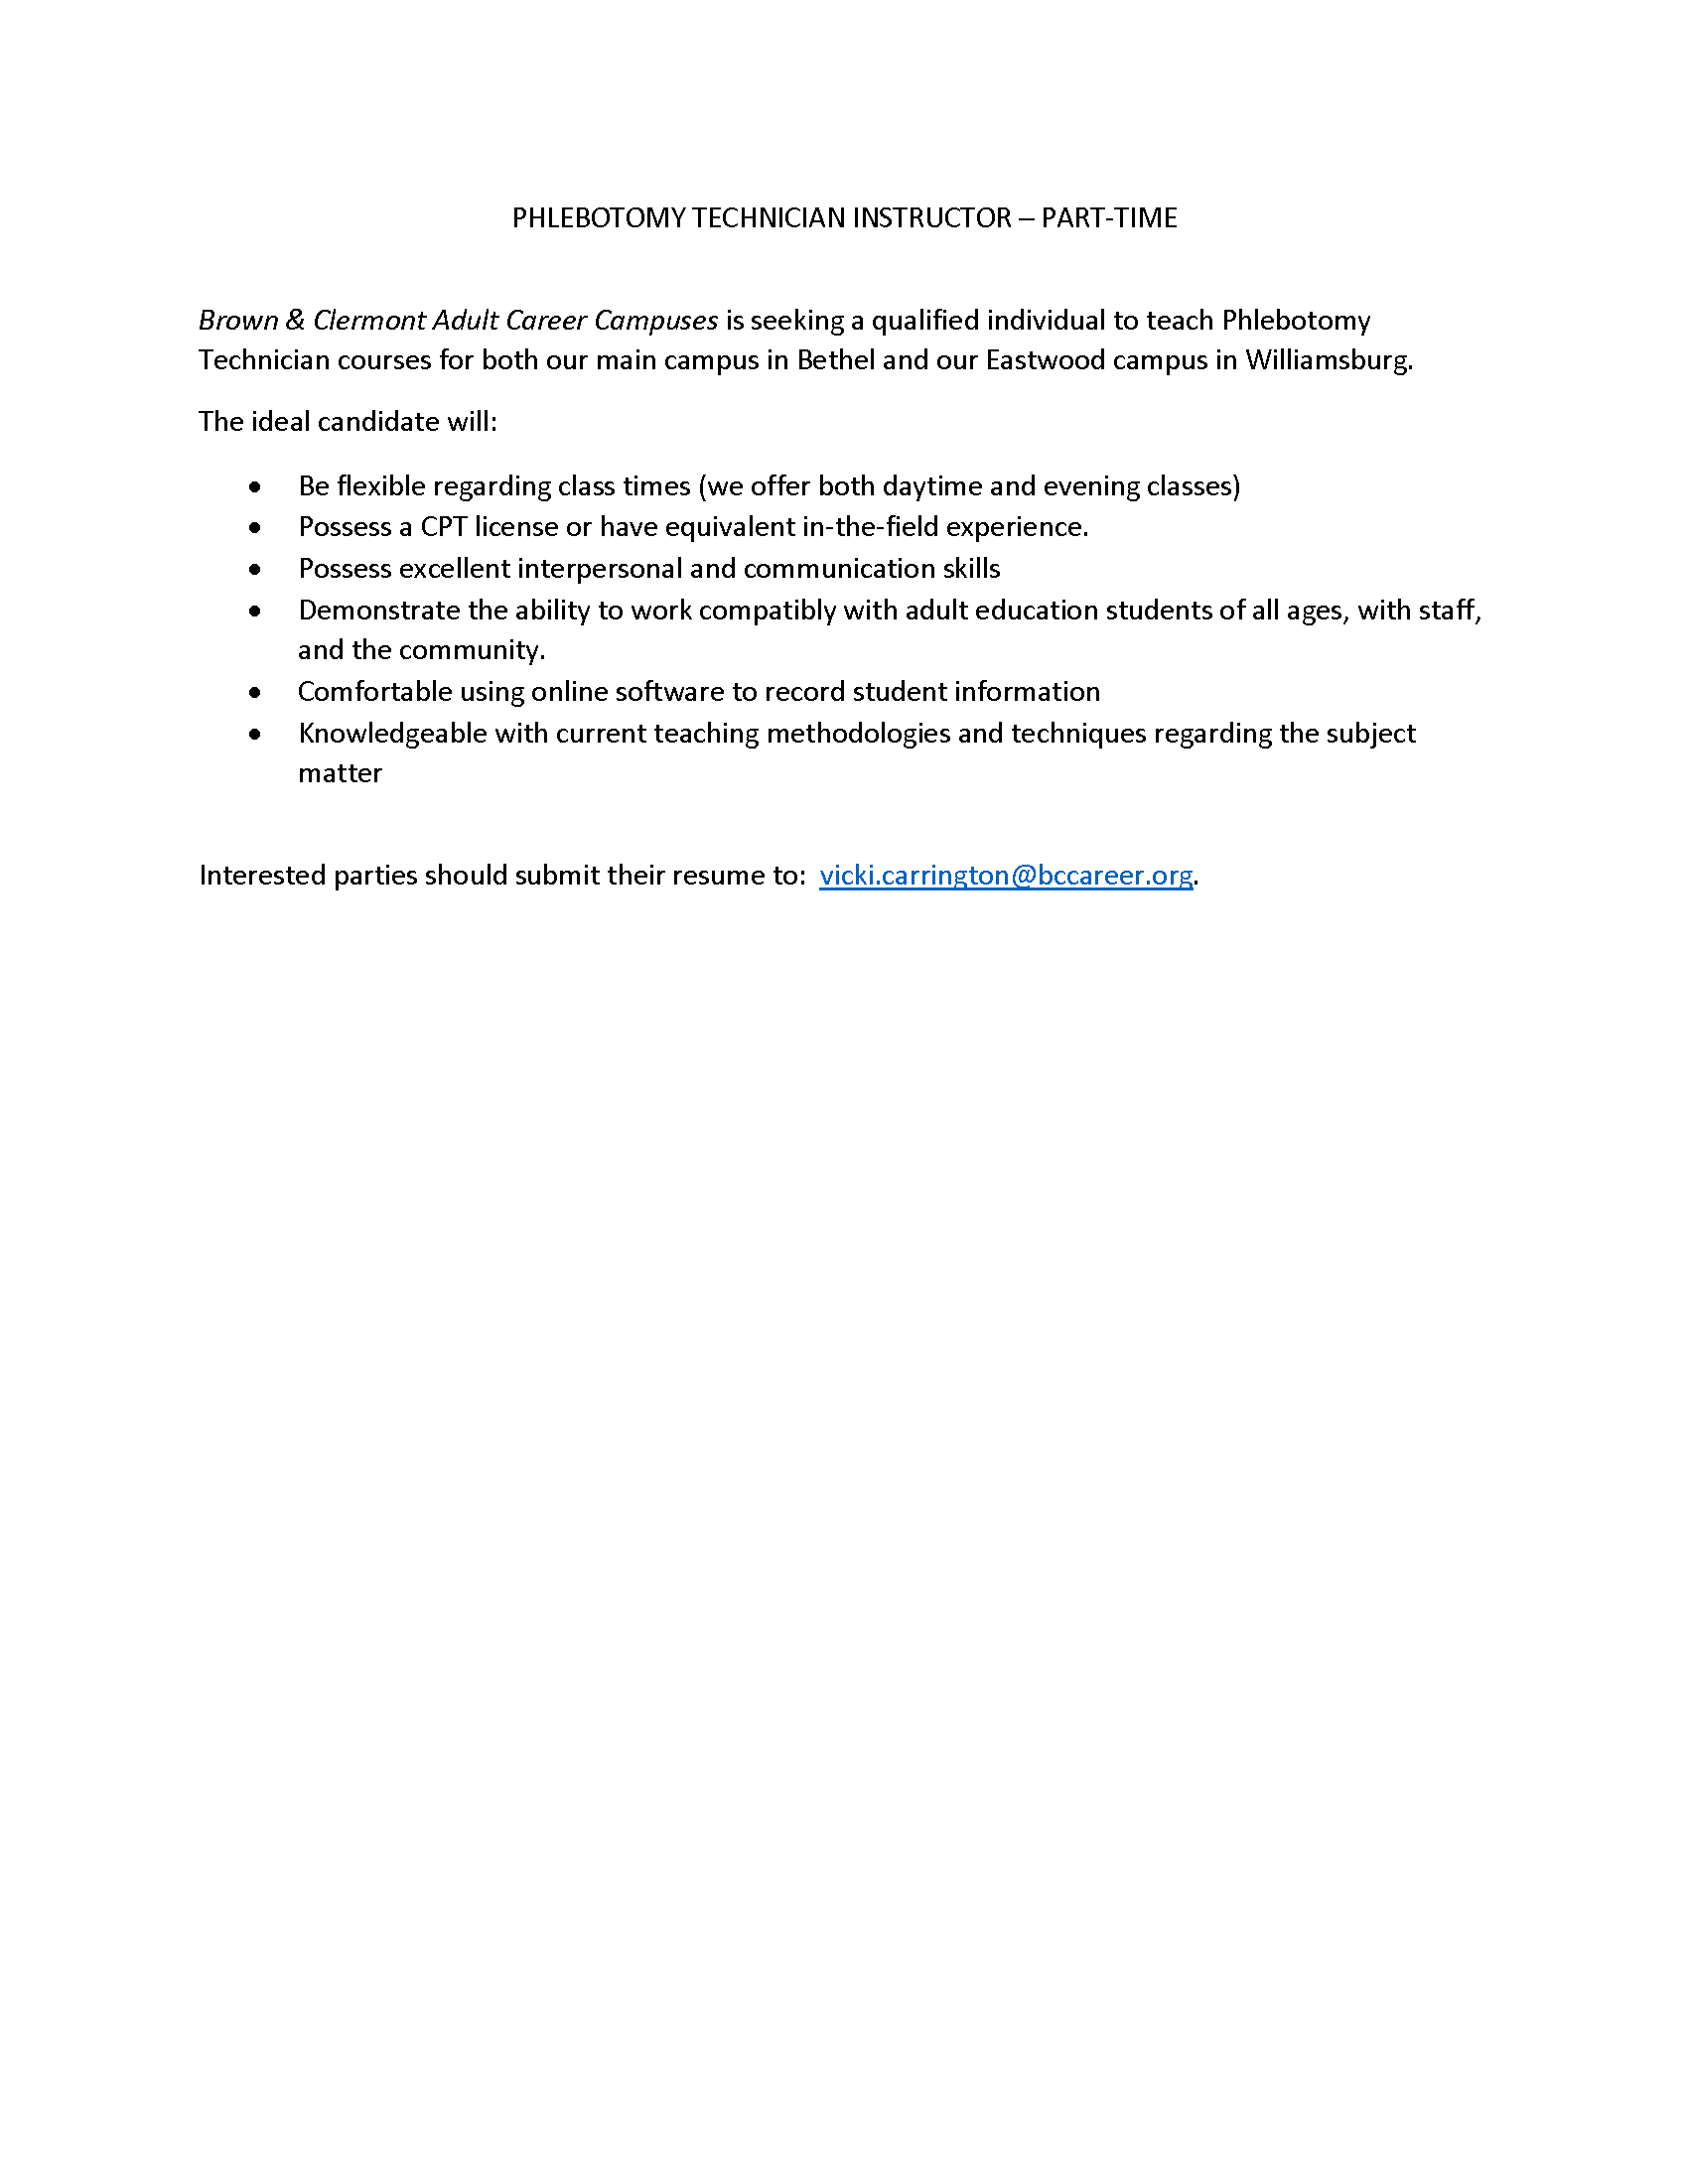 Job Listing for Phlebotomy Technician Instructor